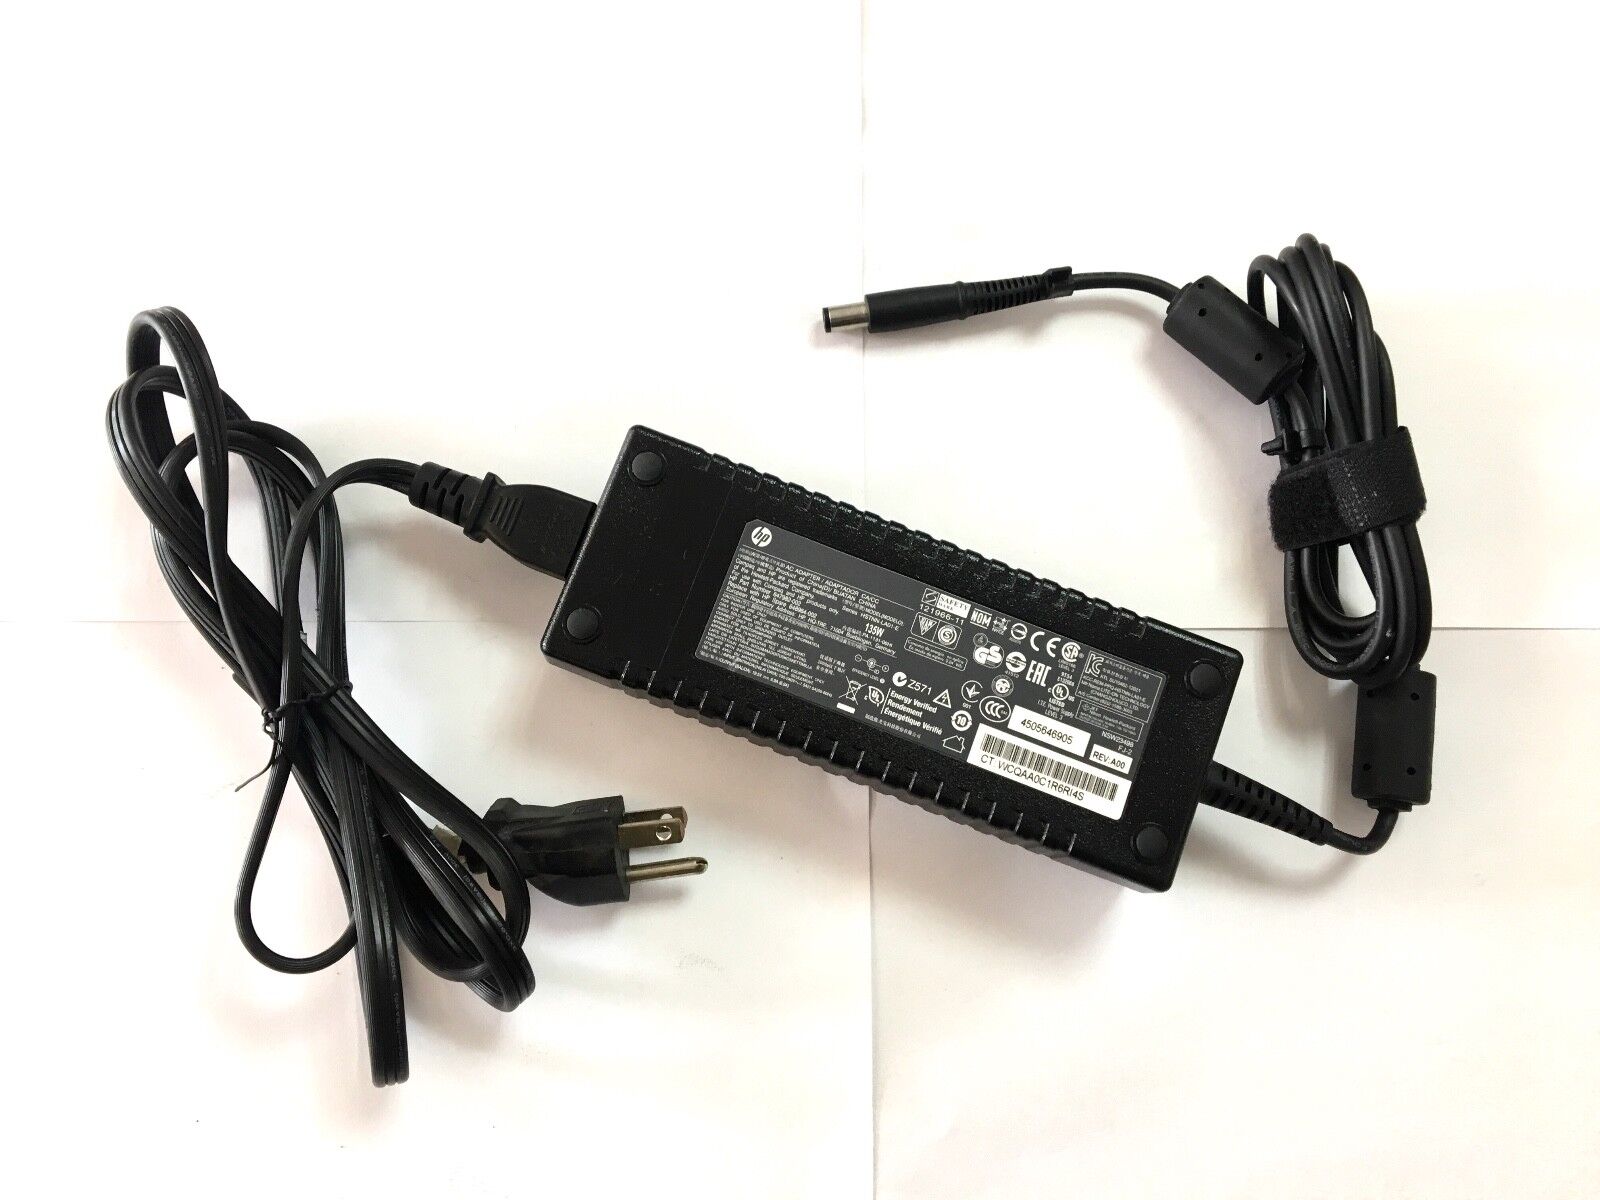 Genuine HP AC Adapter 135W smart pin for TouchSmart pavilion probook DC7900 8300